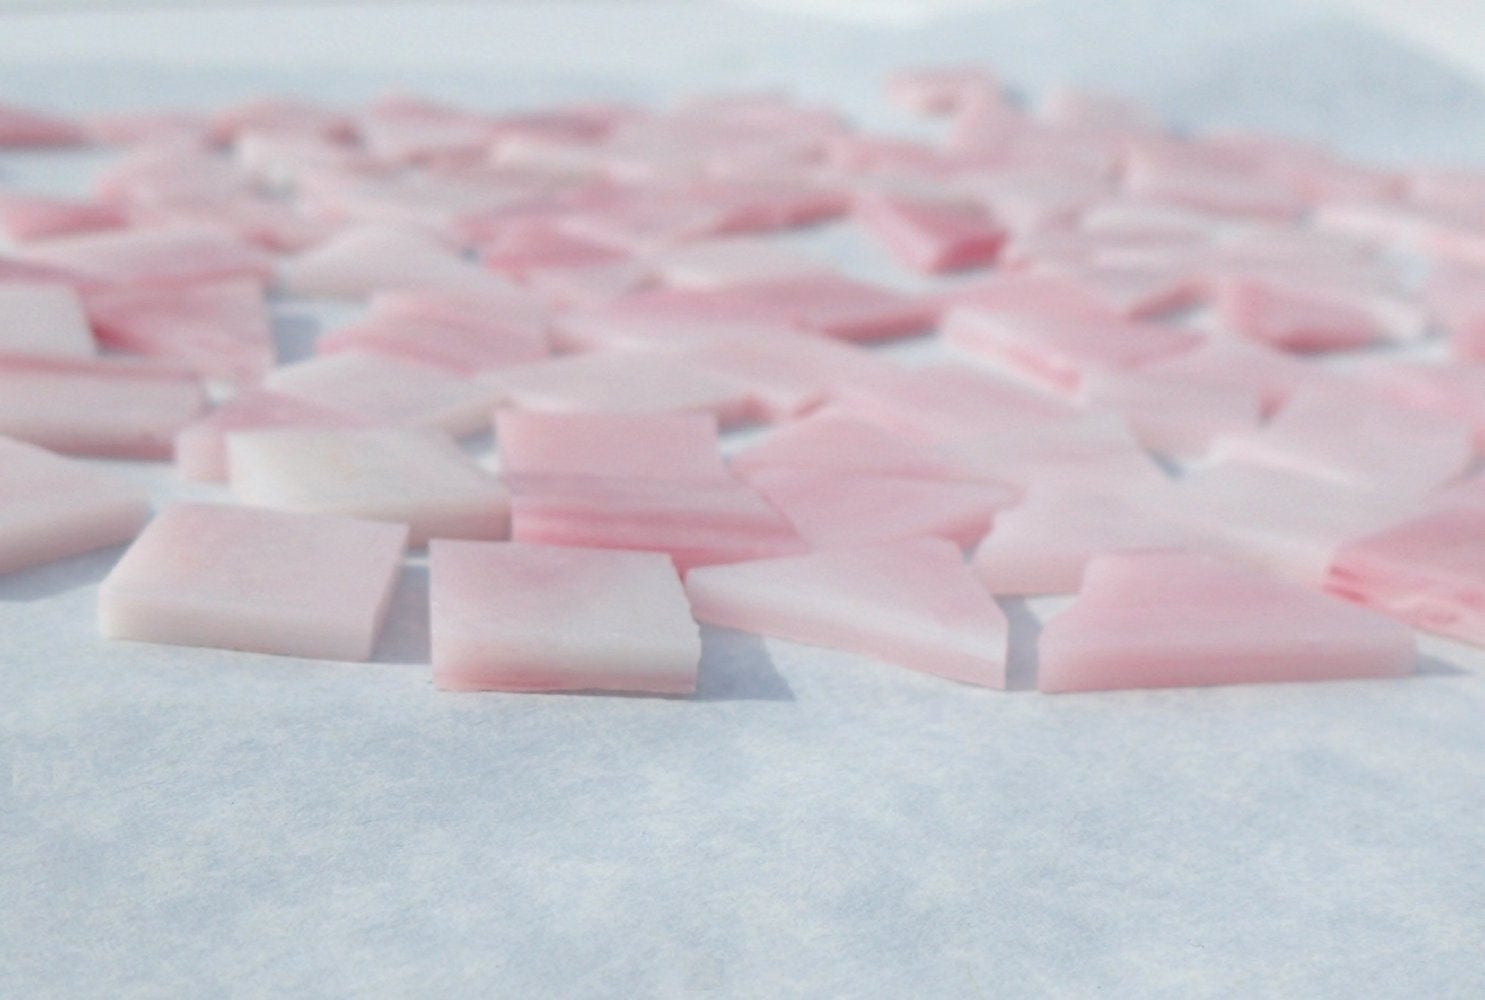 Pink Stained Glass Mosaic Tiles - 1/2 Pound - 5-15 mm Various Shapes